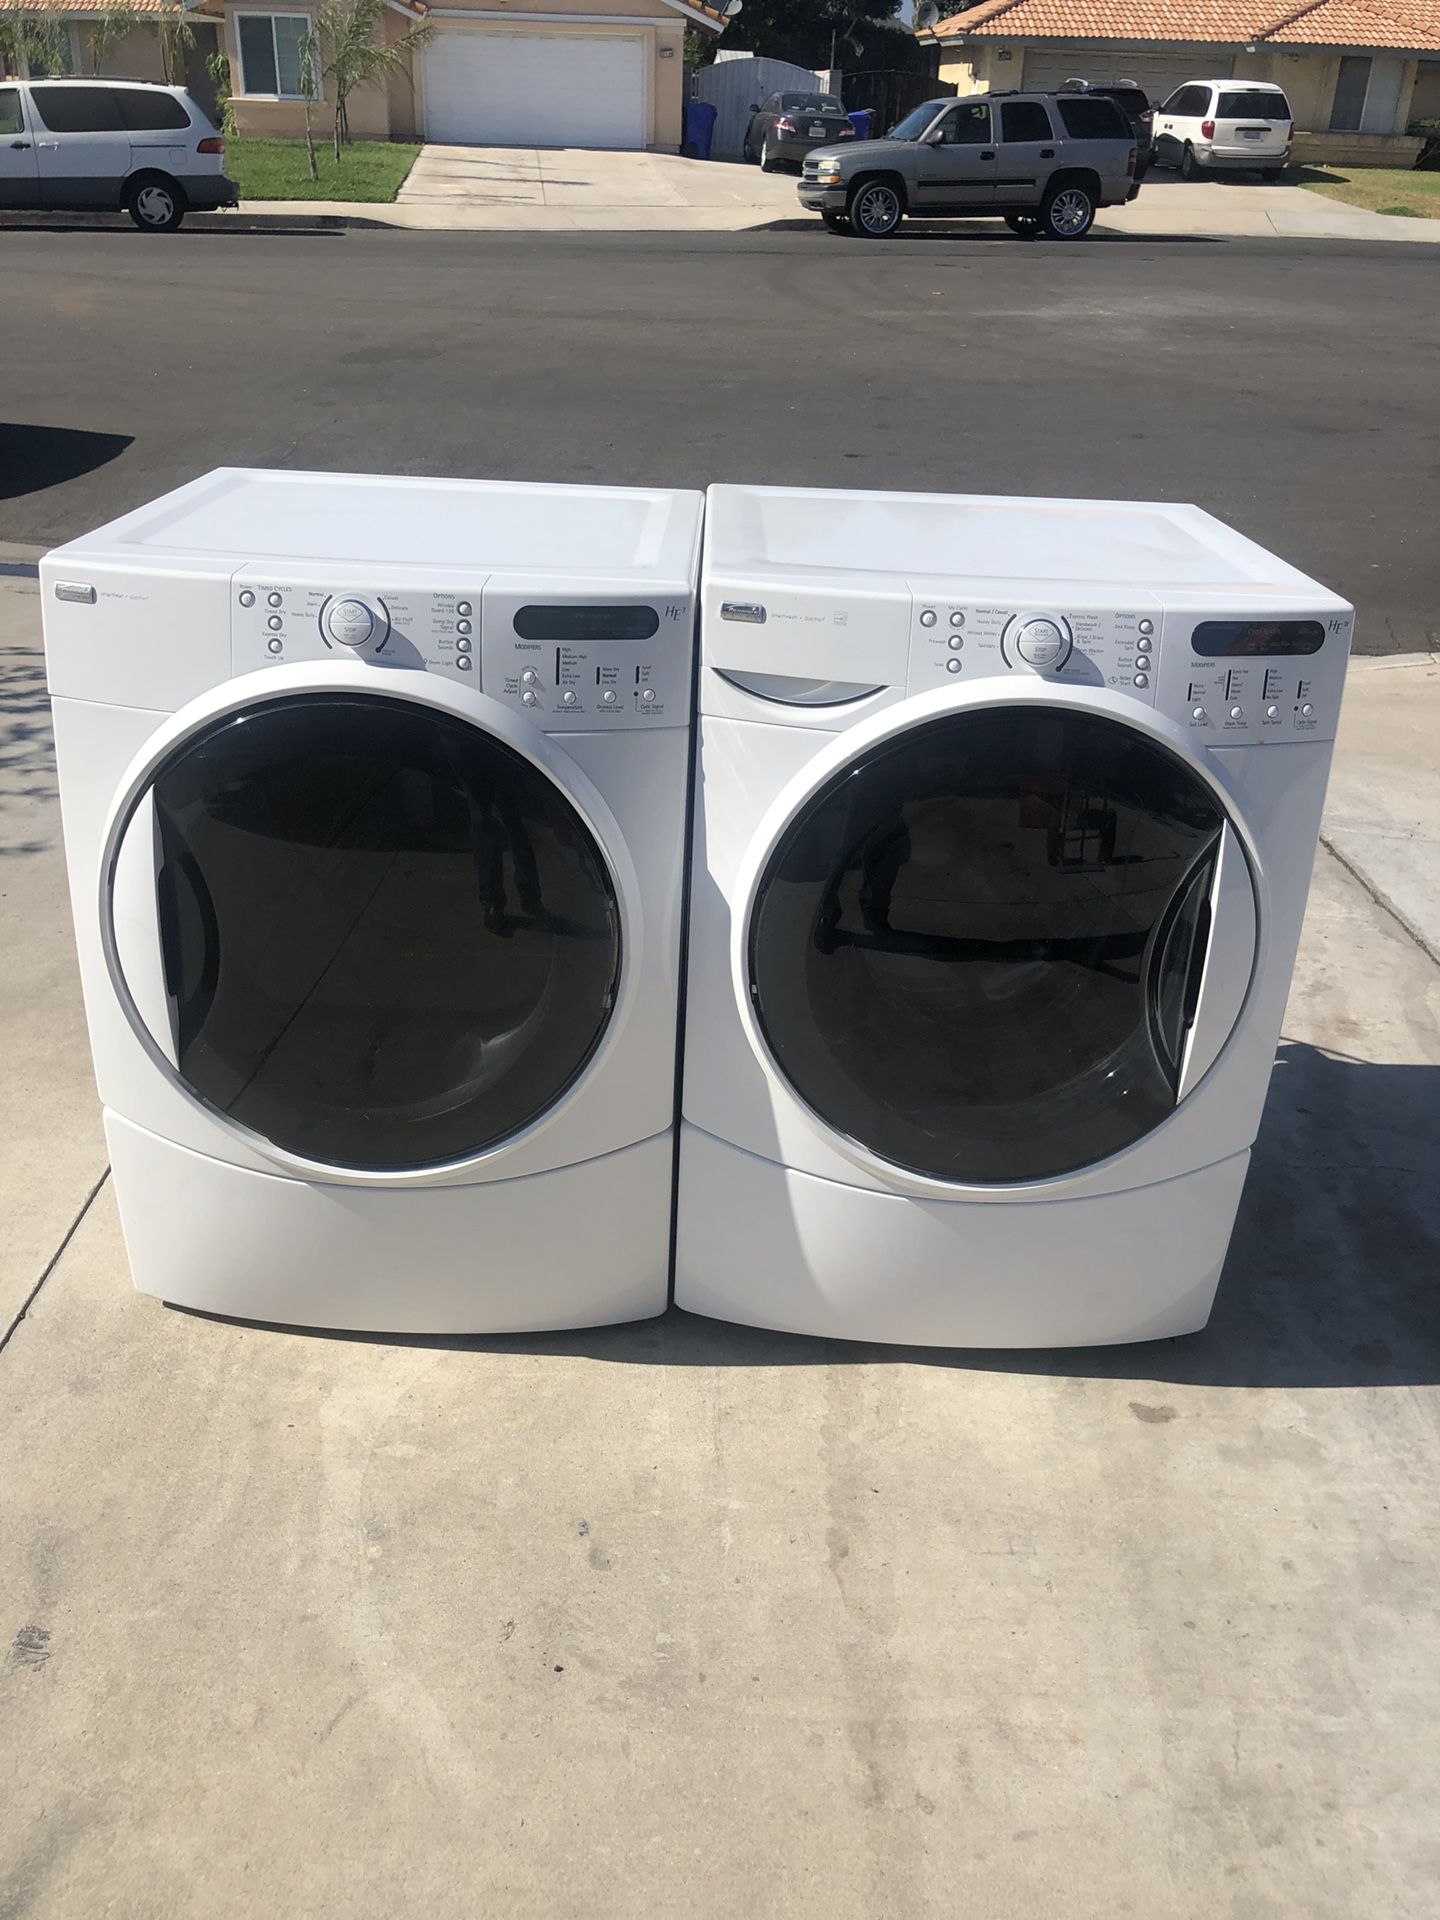 Kenmore Elite washer and dryer gas heavy duty super capacity plus good condition deliver and installation available